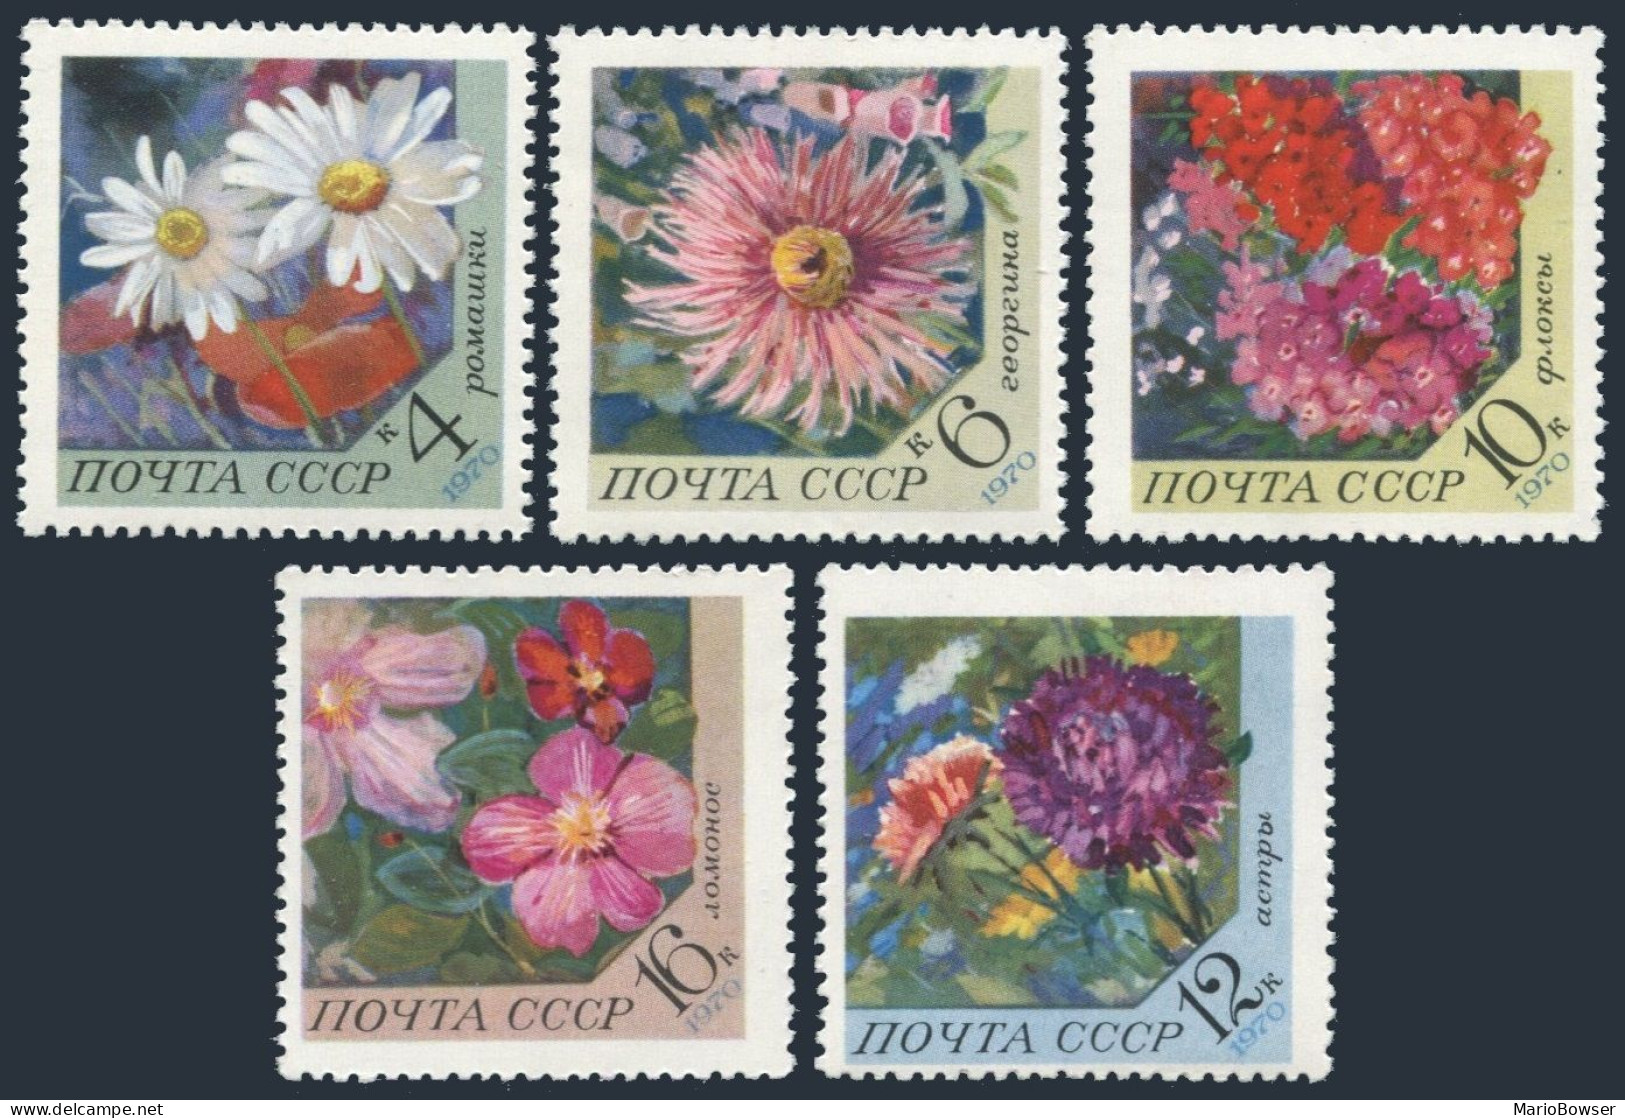 Russia 3789-3793,MNH.Michel 3818-3822. Flowers 1970:Daisy,Dahlia,Phiox,Aster, - Unused Stamps